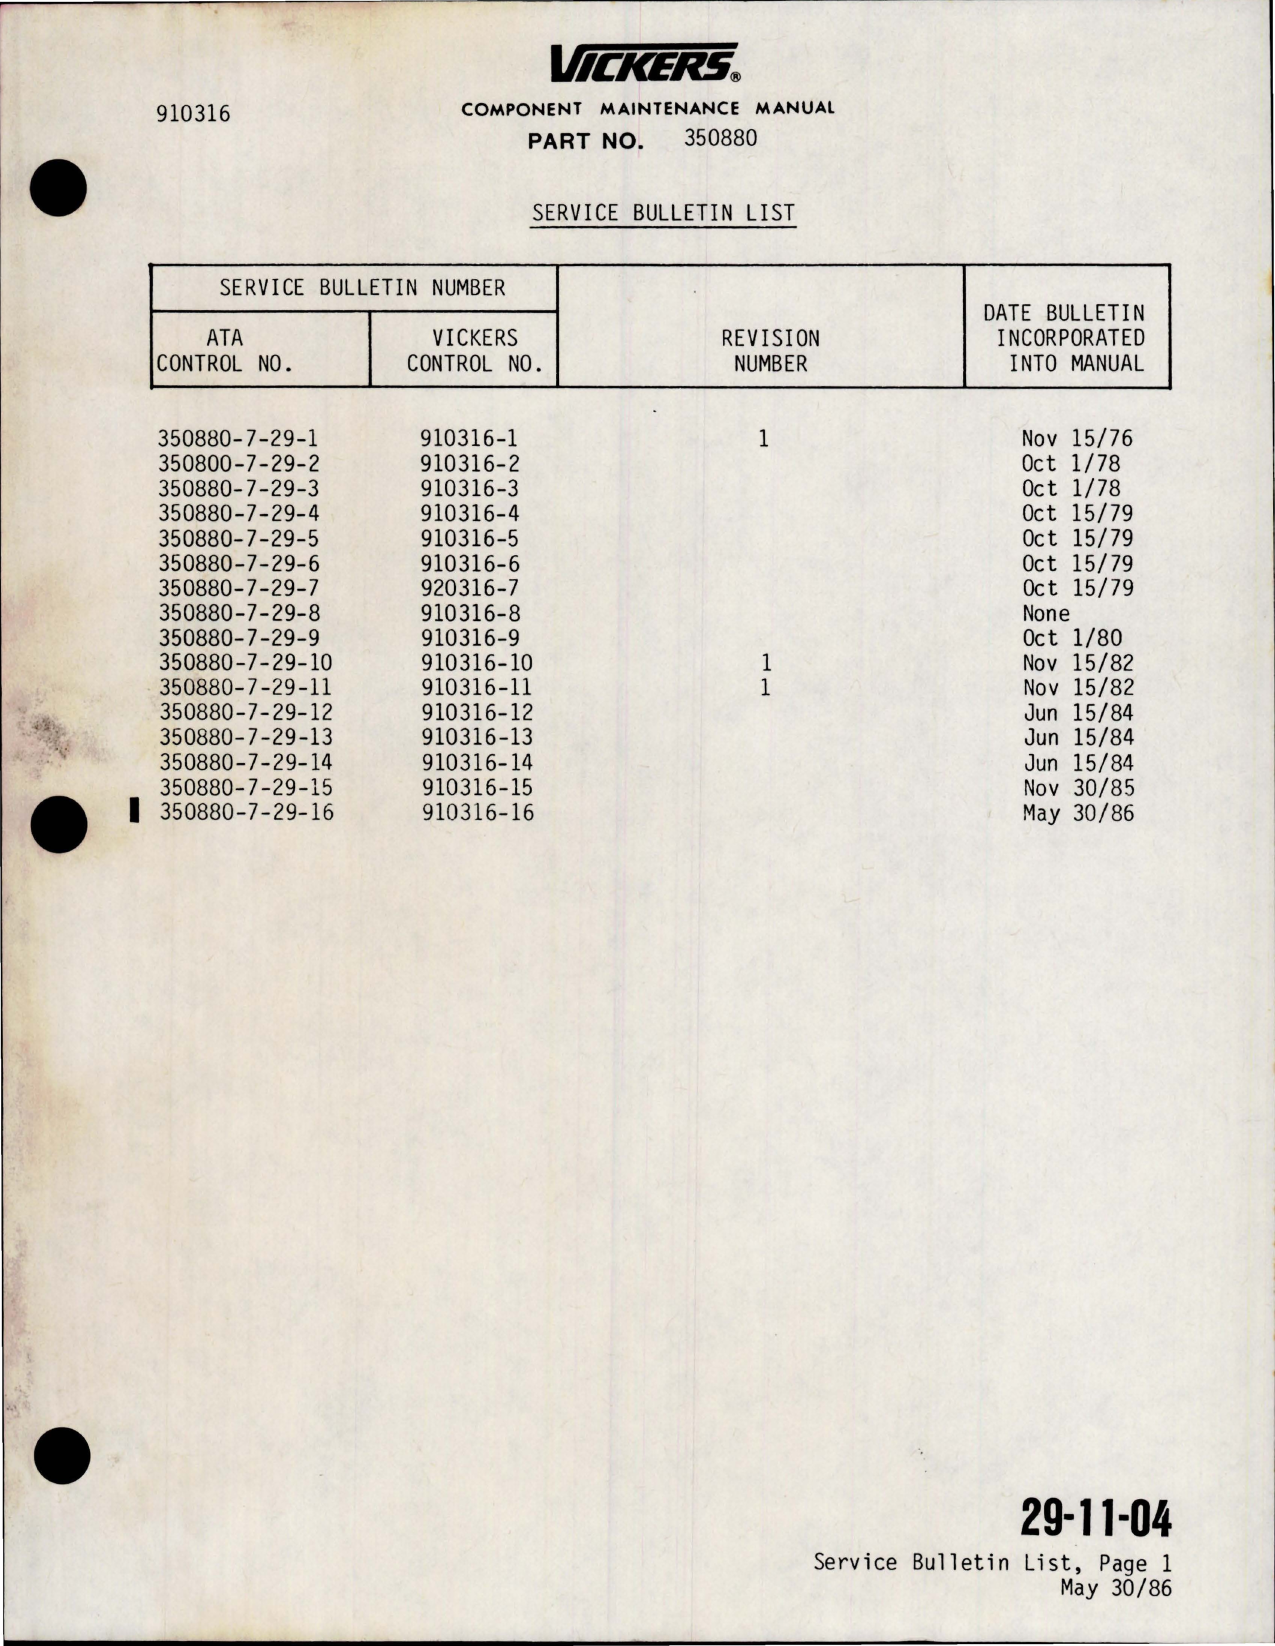 Sample page 7 from AirCorps Library document: Maintenance Manual with Illustrated Parts List for Variable Displacement Hydraulic Pump - Model PV3-240-2G - Part 350880-7